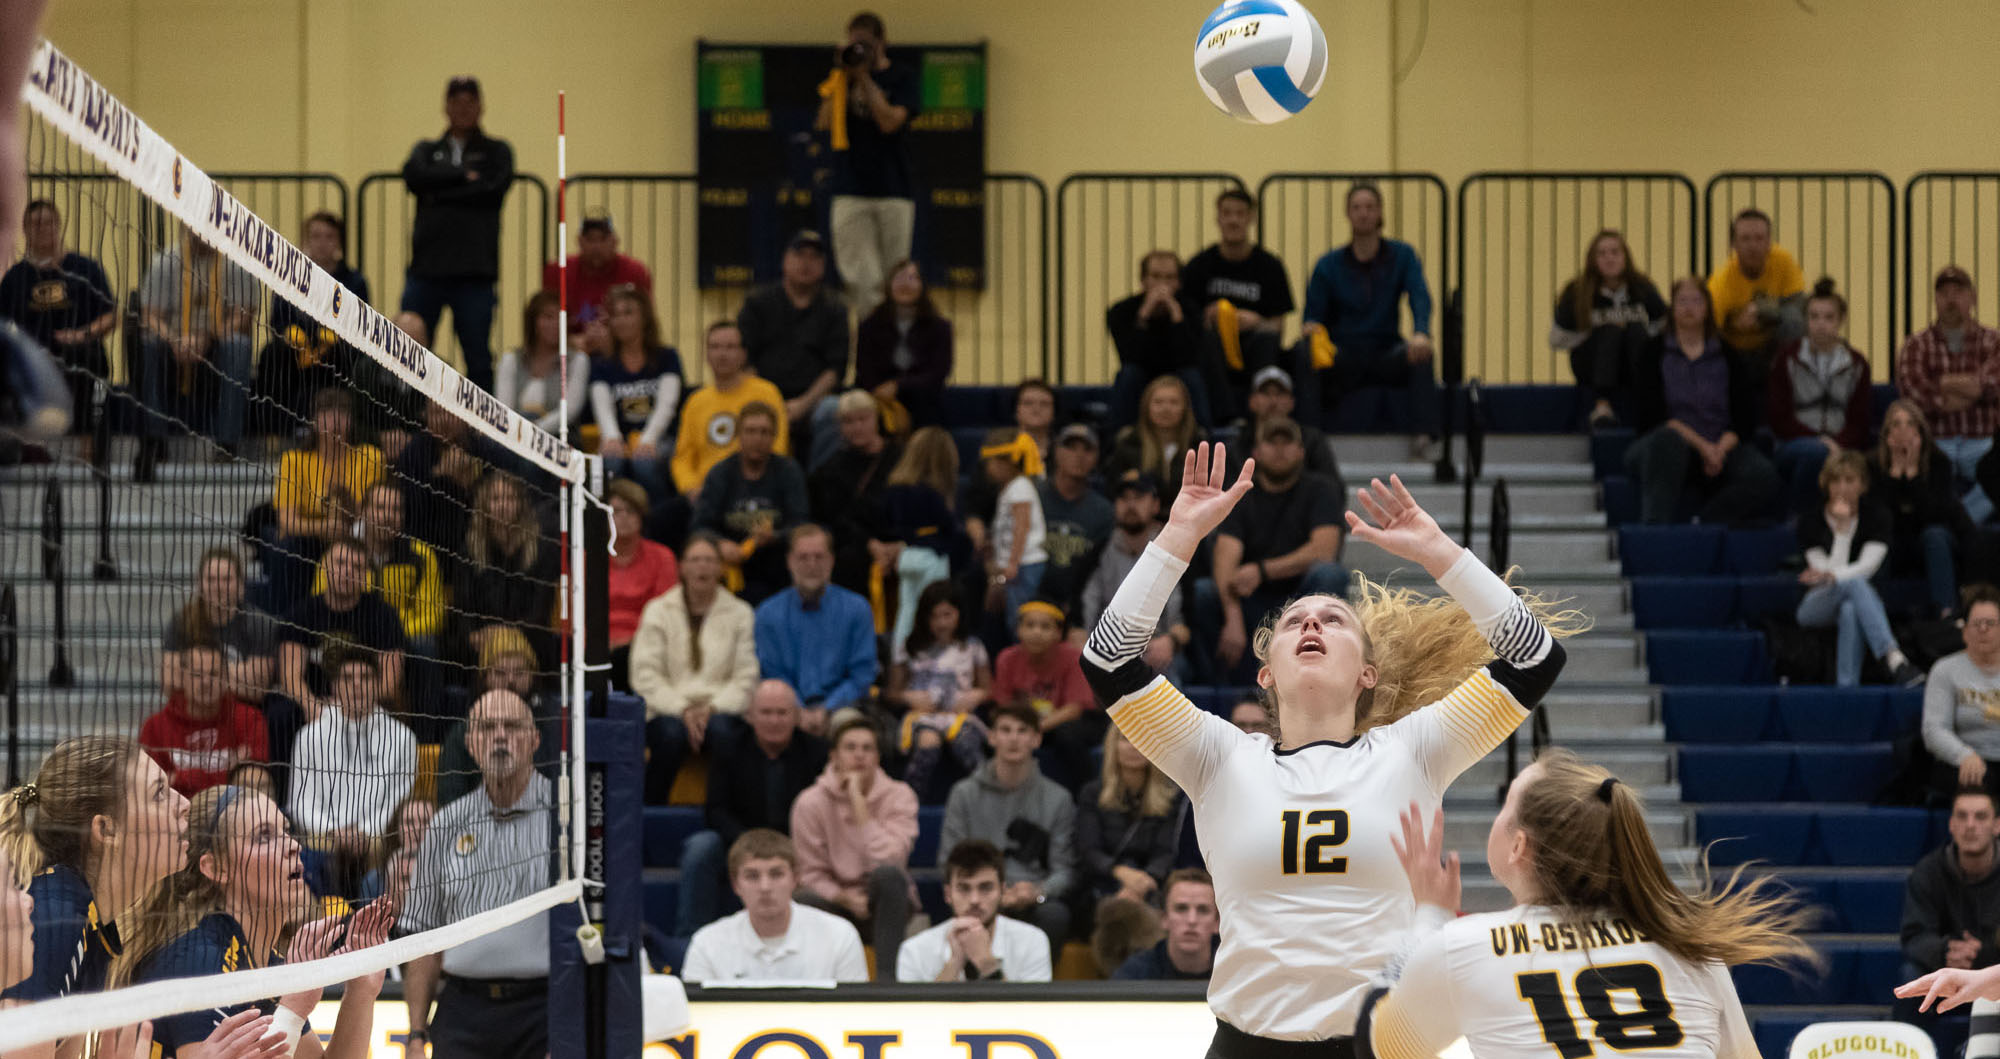 Emma Kiekhofer had 14 assists and five digs against the Blugolds.